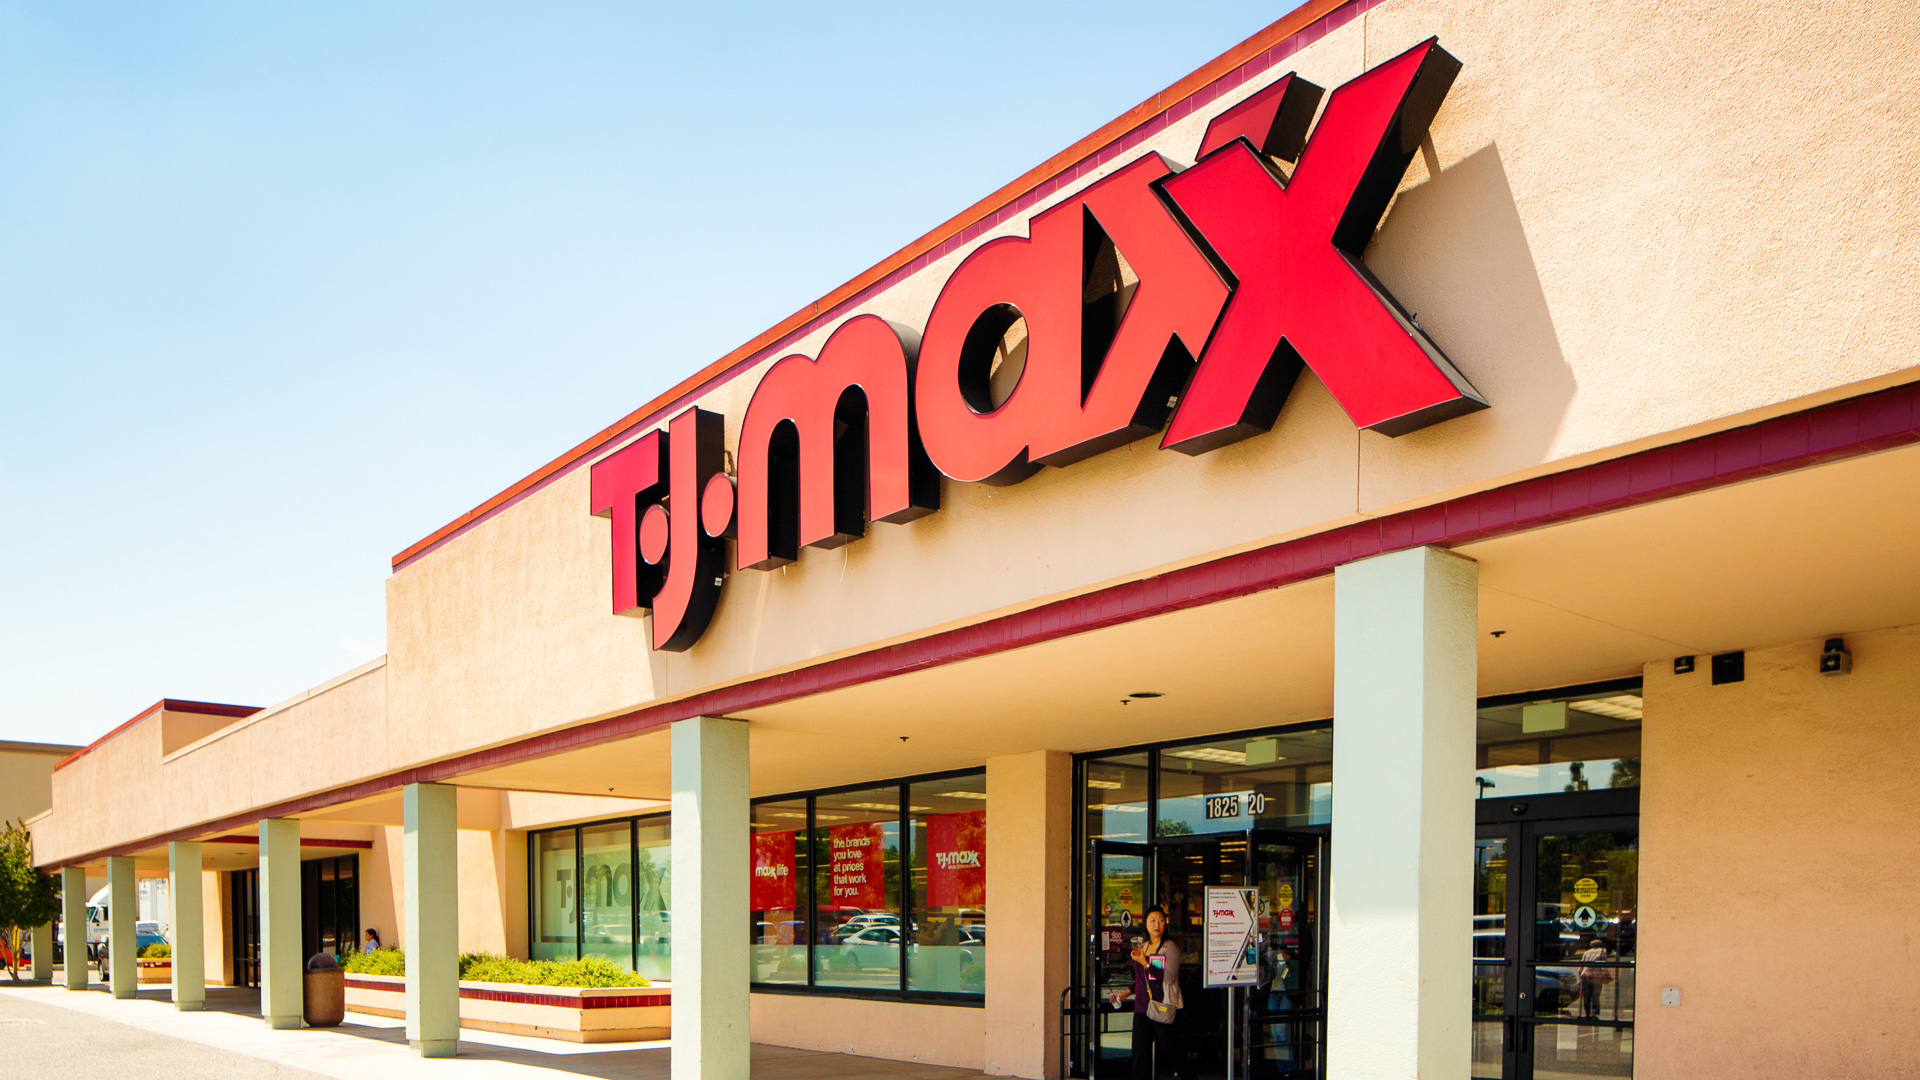 Can You Use A TJ Maxx Gift Card At Marshalls? [Online/Store]